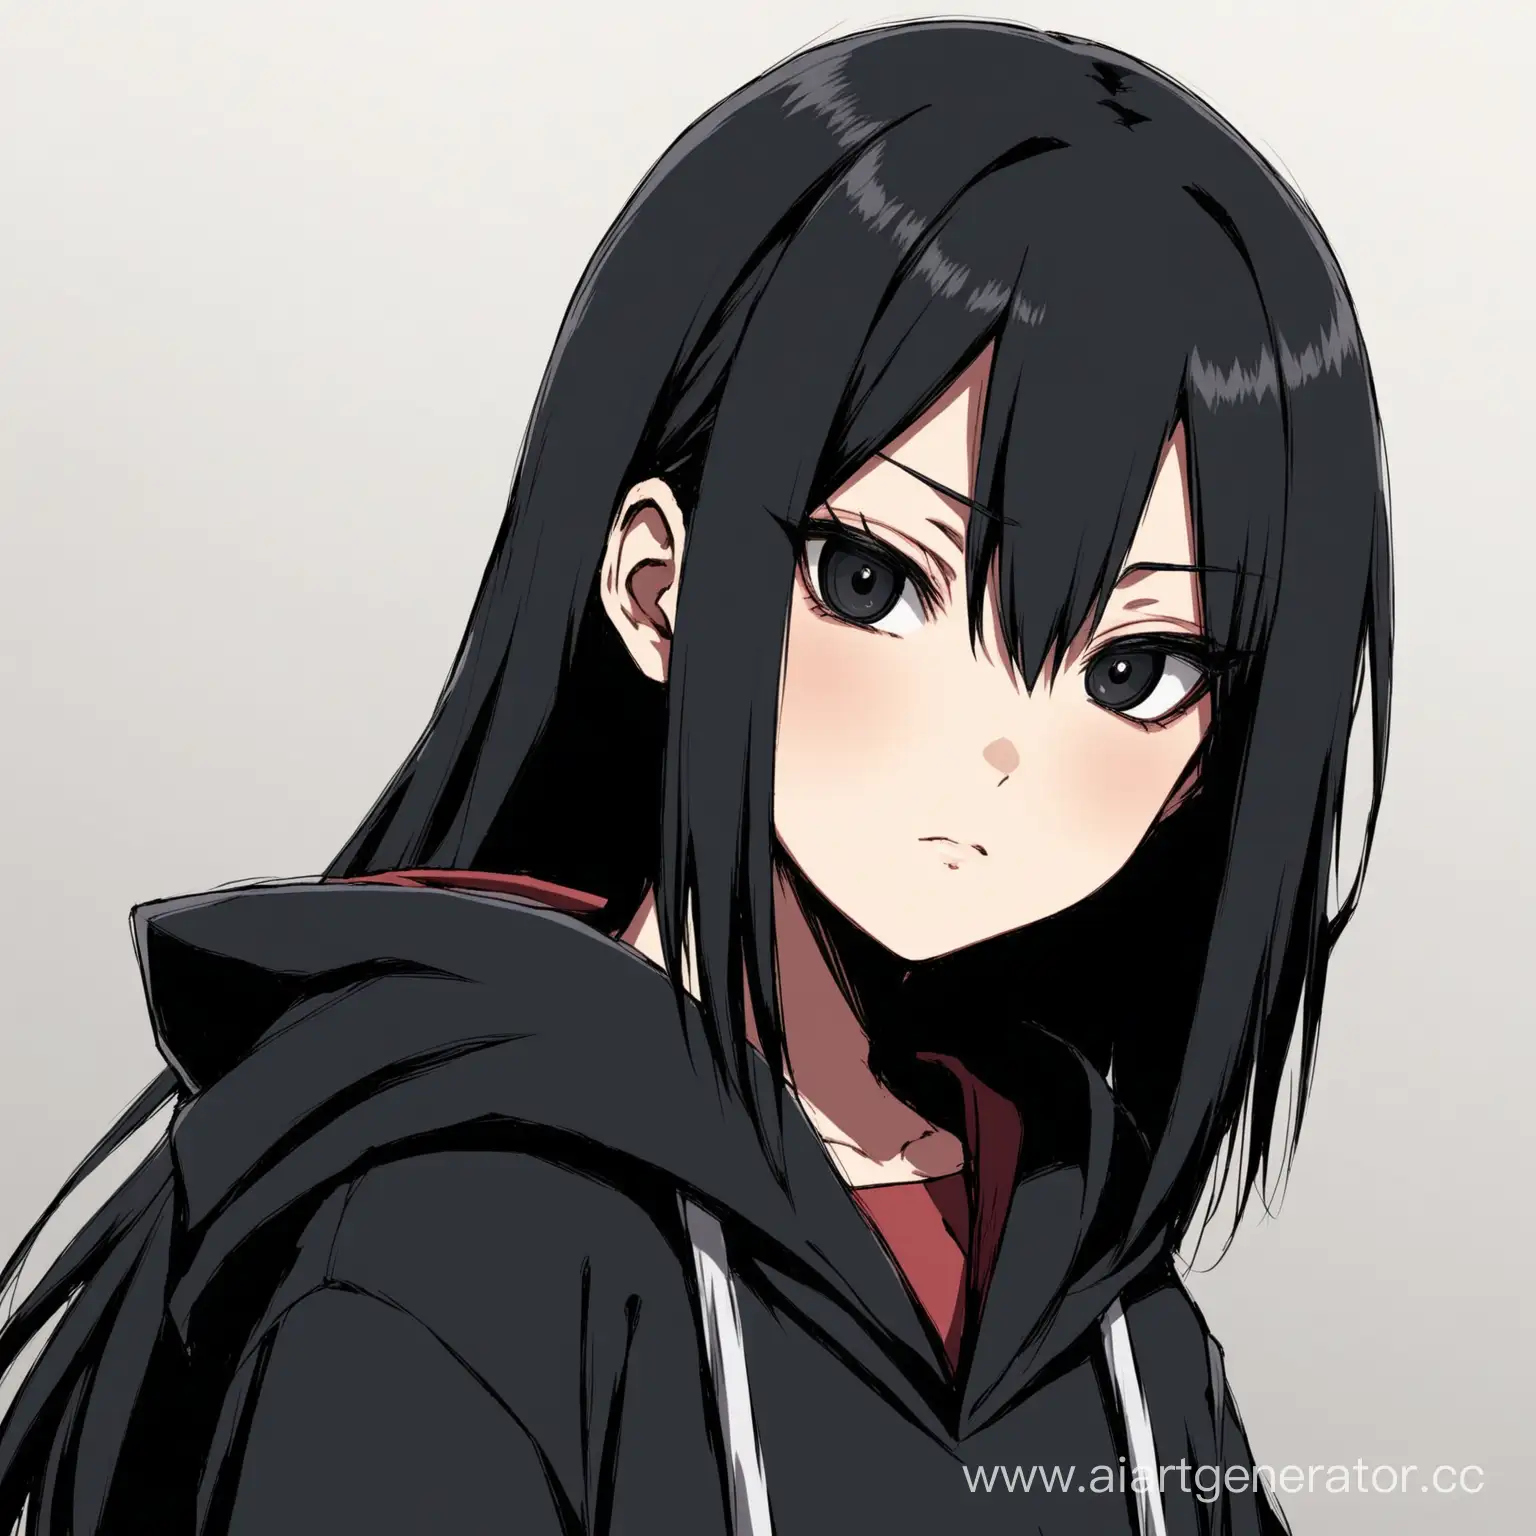 Young-Uchiha-Girl-with-Raven-Hair-and-Piercing-Eyes